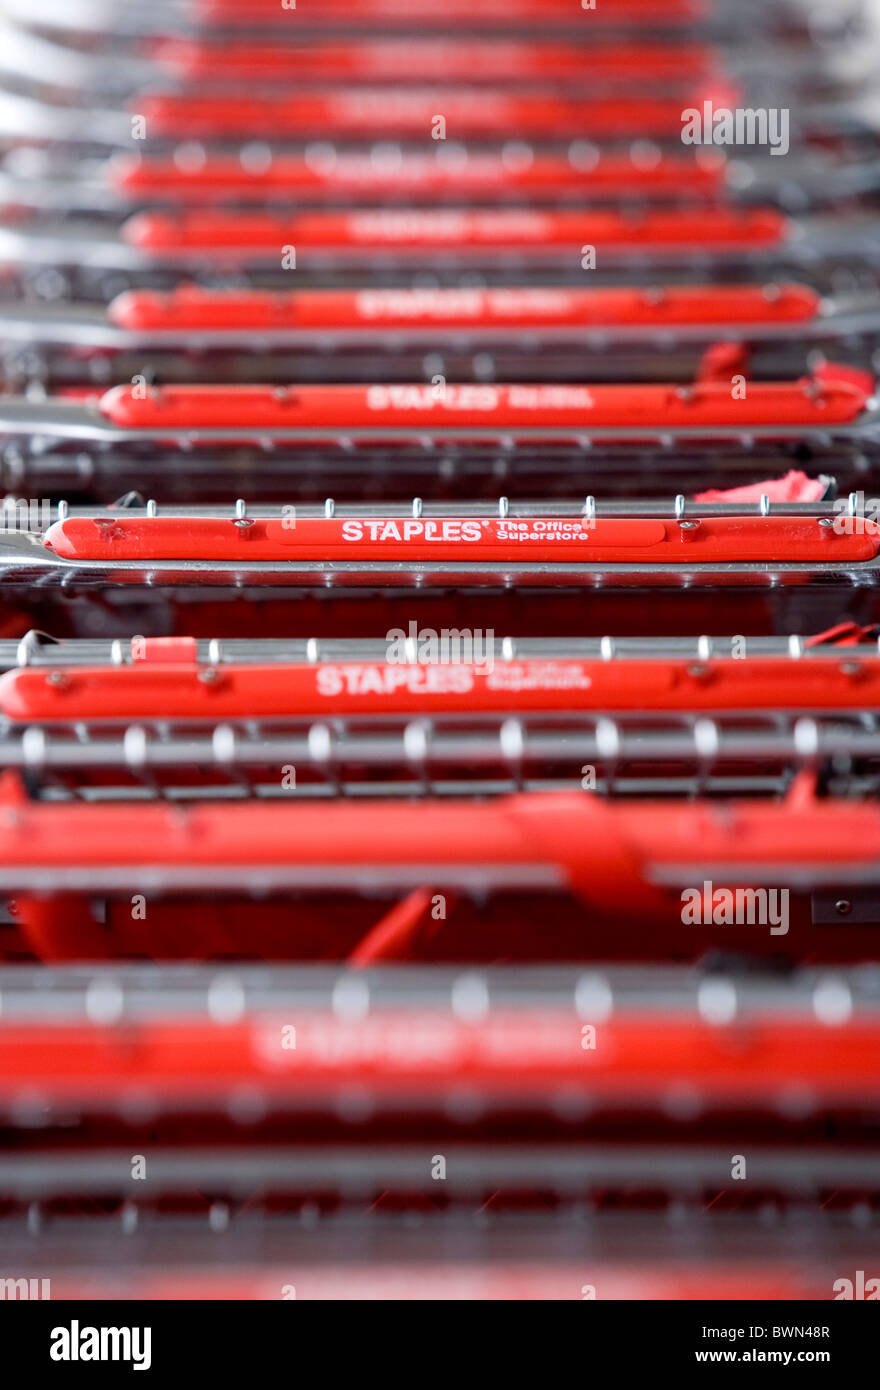 A Staples office supply superstore.  Stock Photo